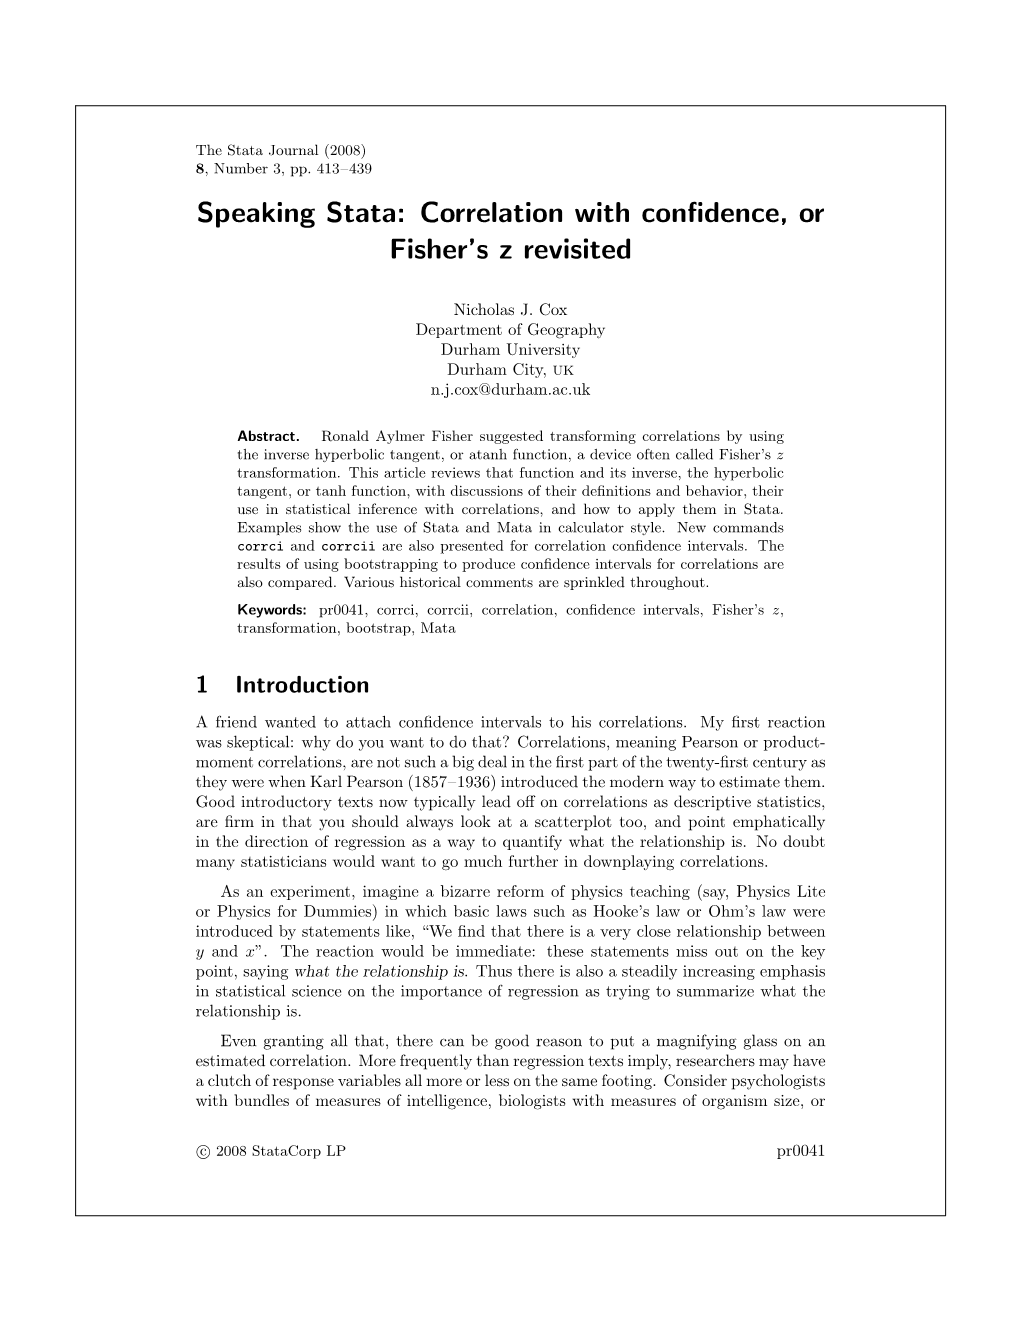 Speaking Stata: Correlation with Confidence, Or Fisher's Z Revisited